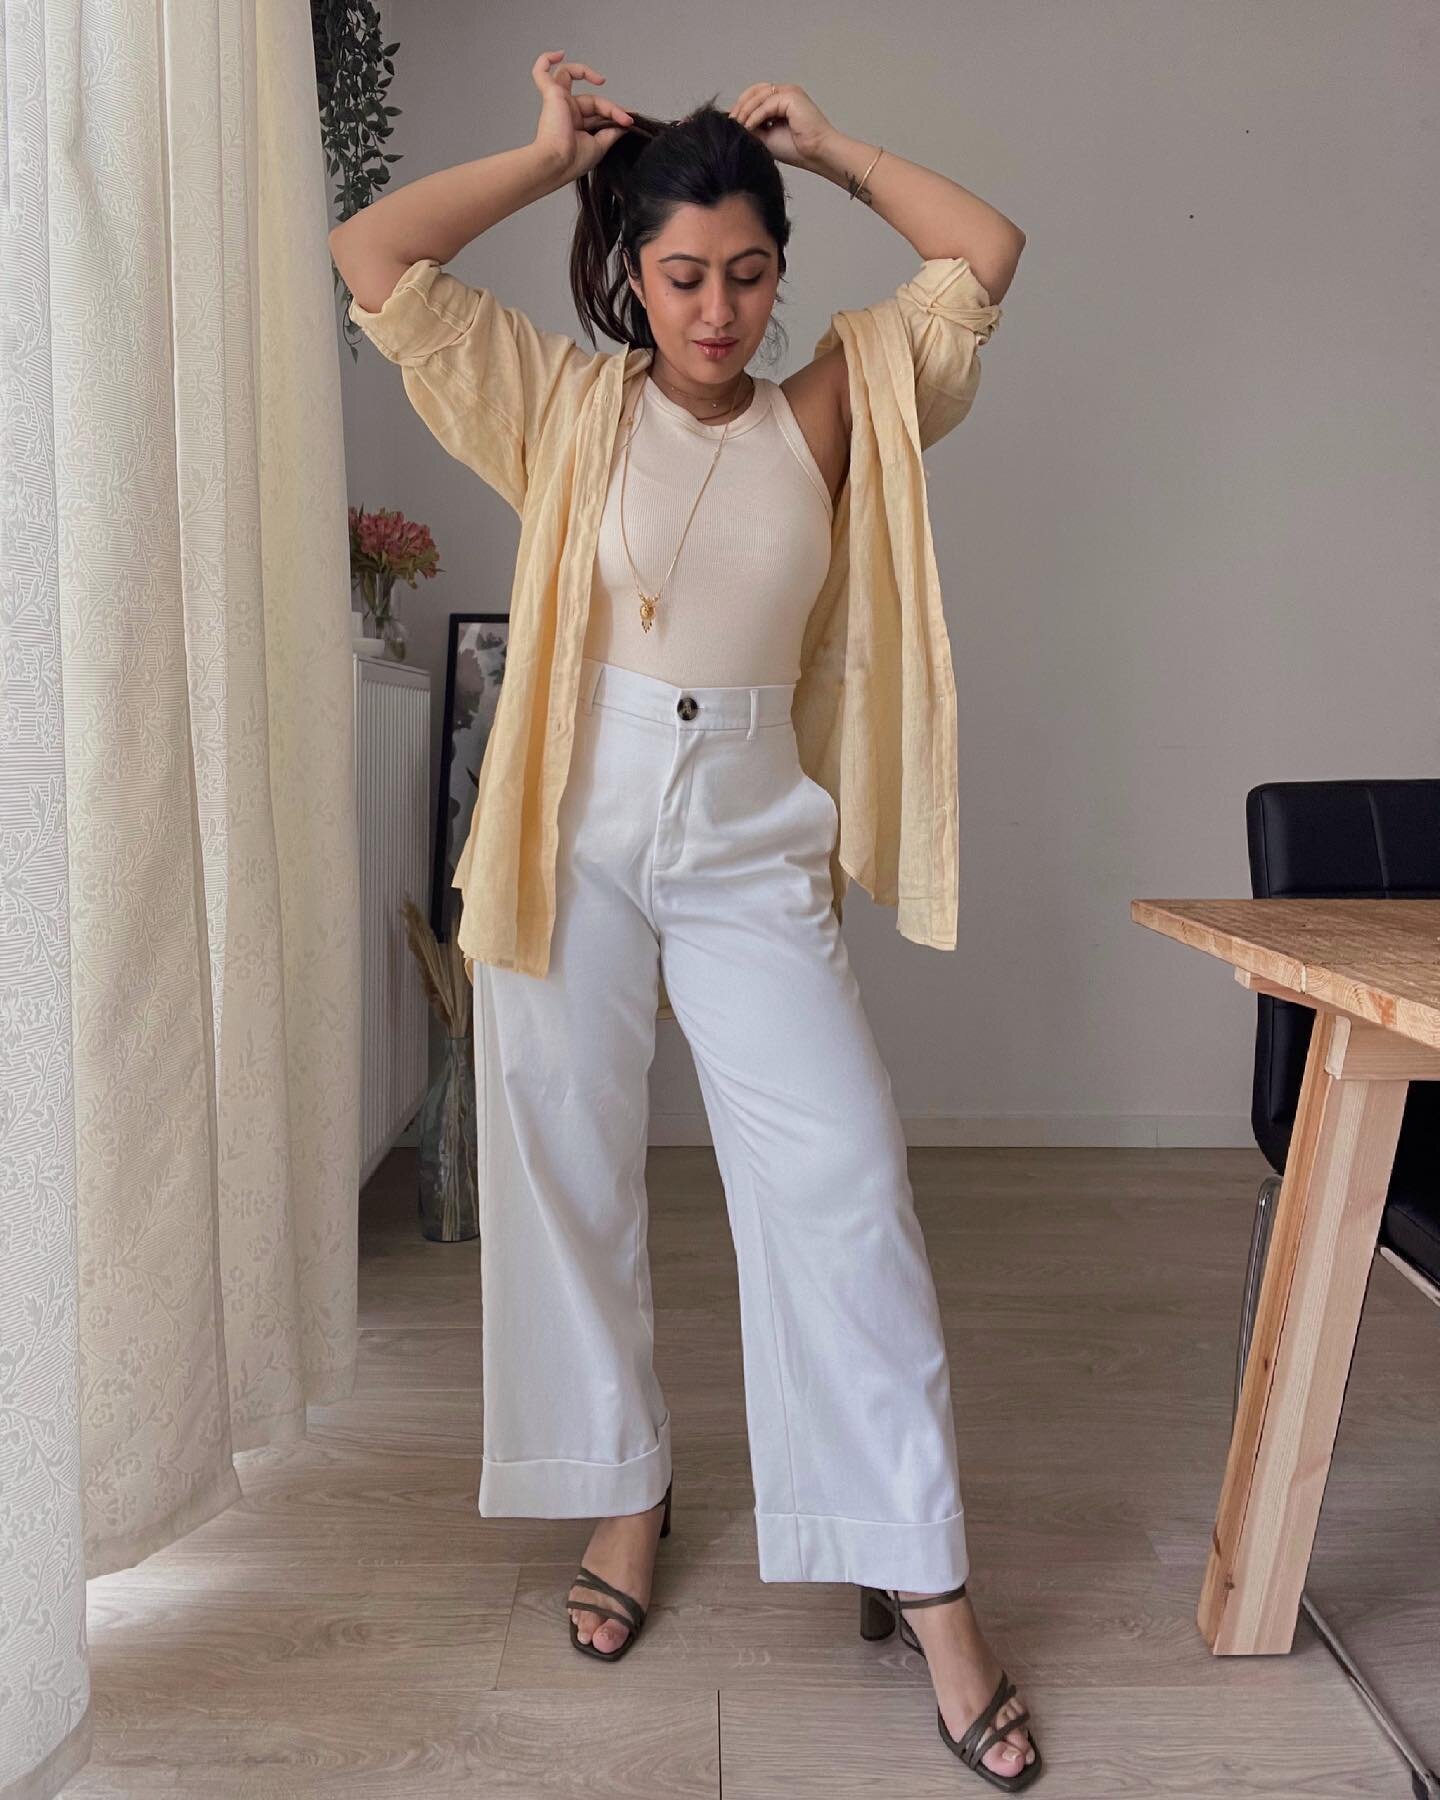 Linen shirts are absolute summer essential! I immediately fell in love with this yellow number from @hm